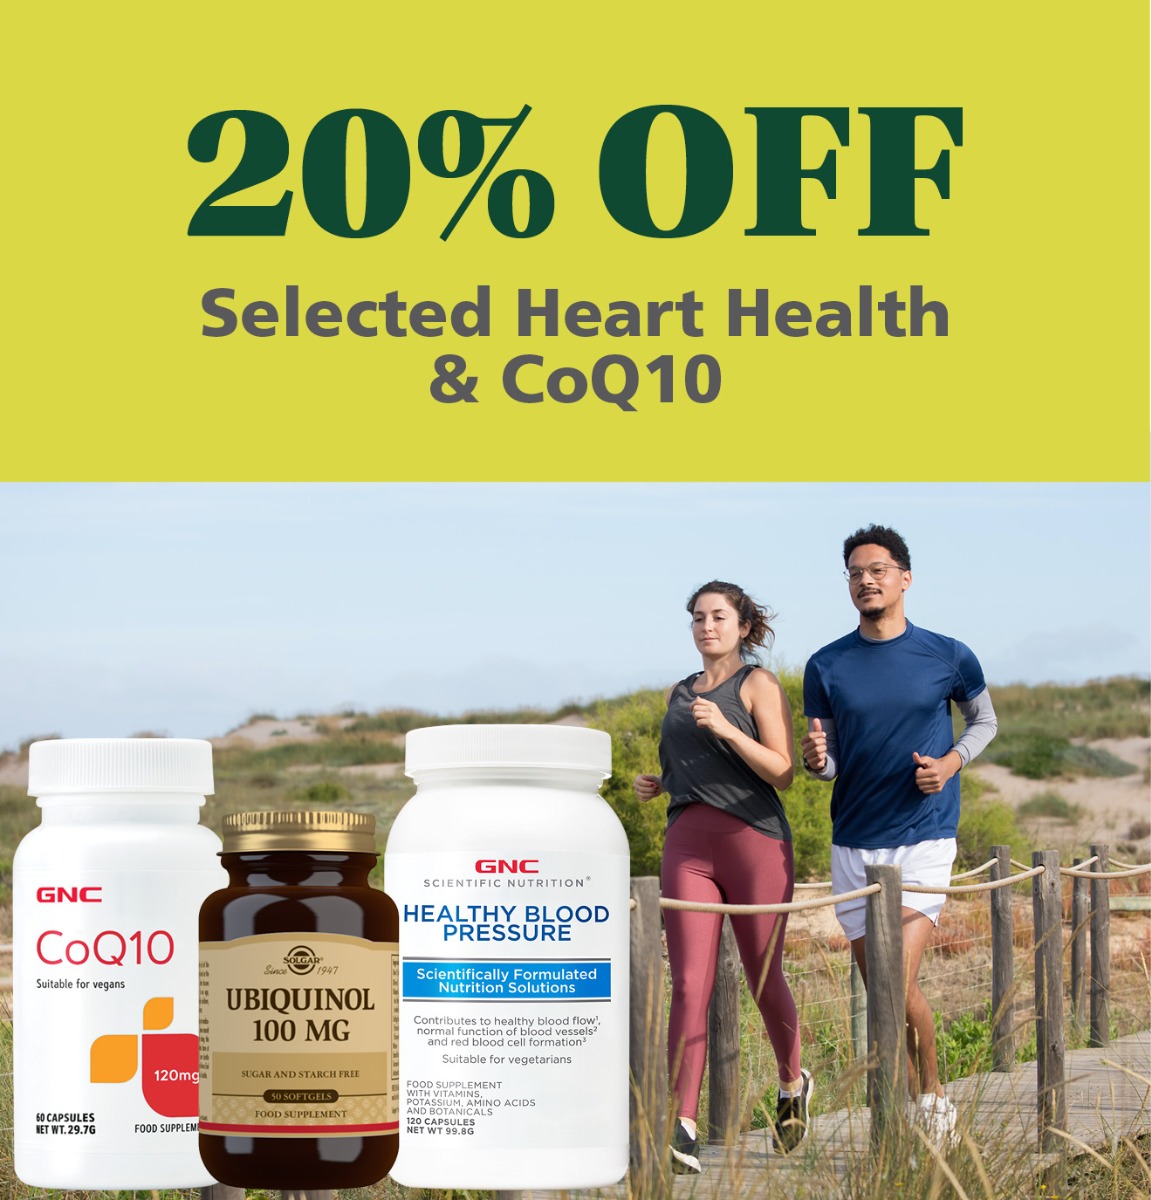 SELECTED 20% OFF HEART HEALTH & COQ10